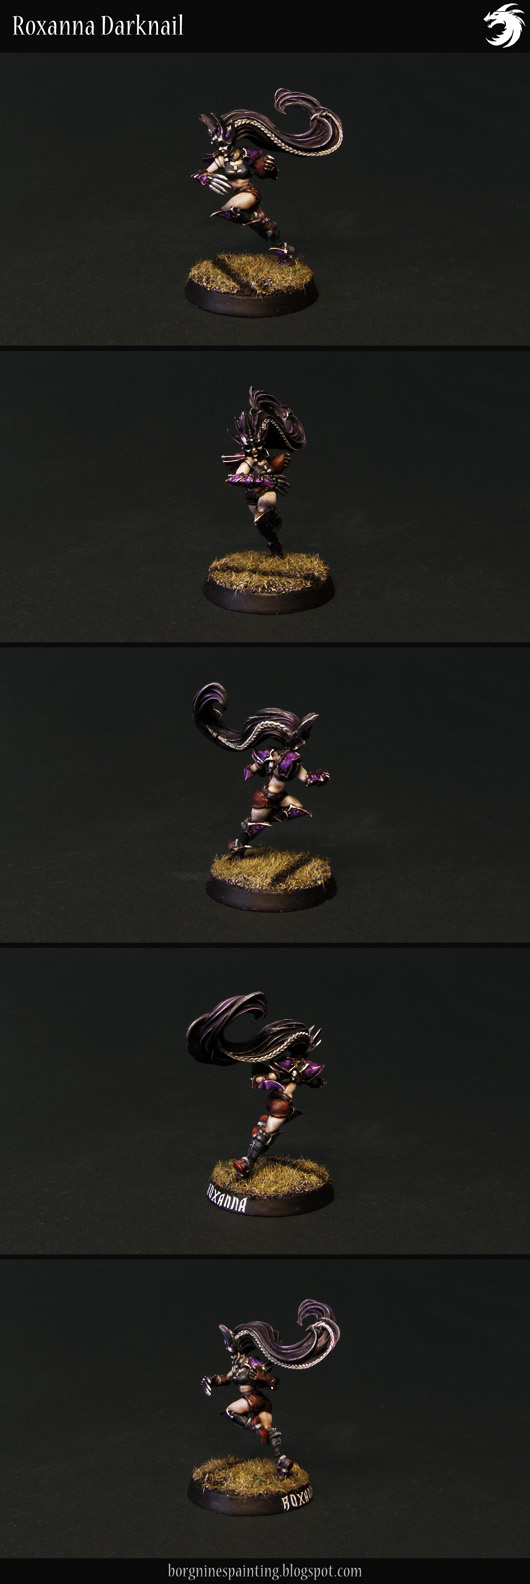 Roxanna Darknail - painted miniature from Forge World, a Dark Elf Star Player for Blood Bowl, painted in a purple color scheme and visible from several angles.